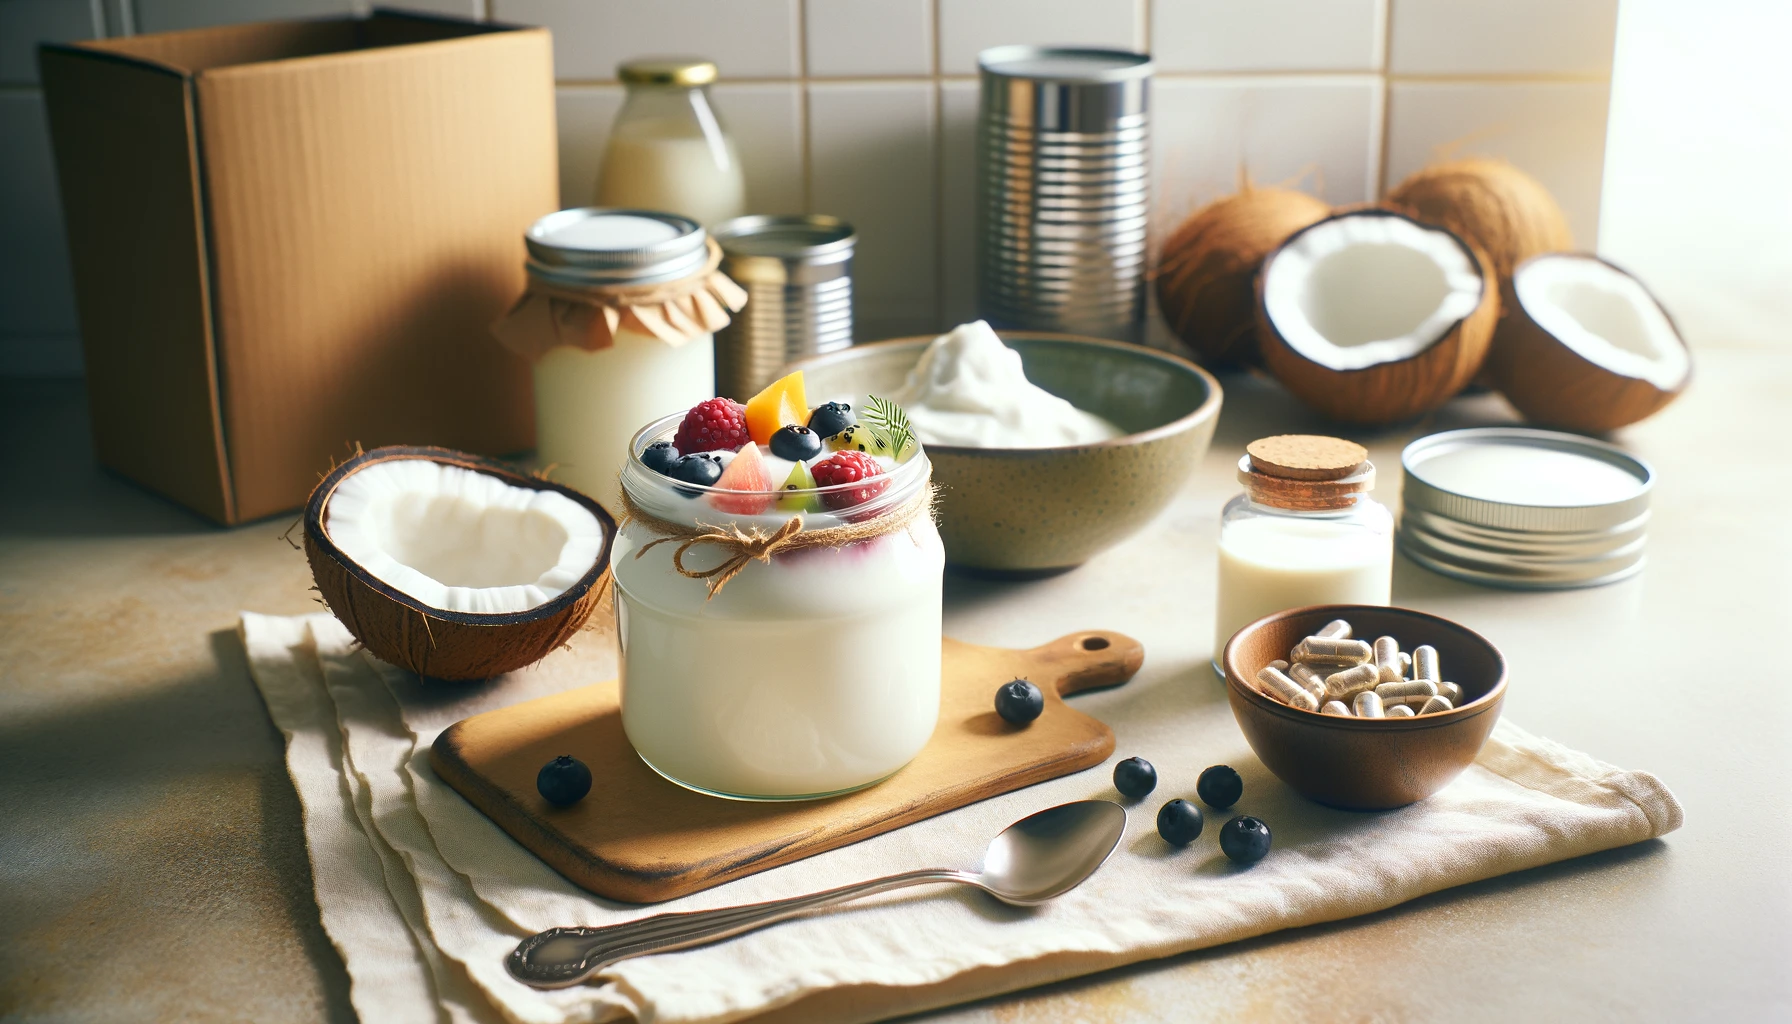 blog featured image for post about making coconut yogurt from canned coconut milk